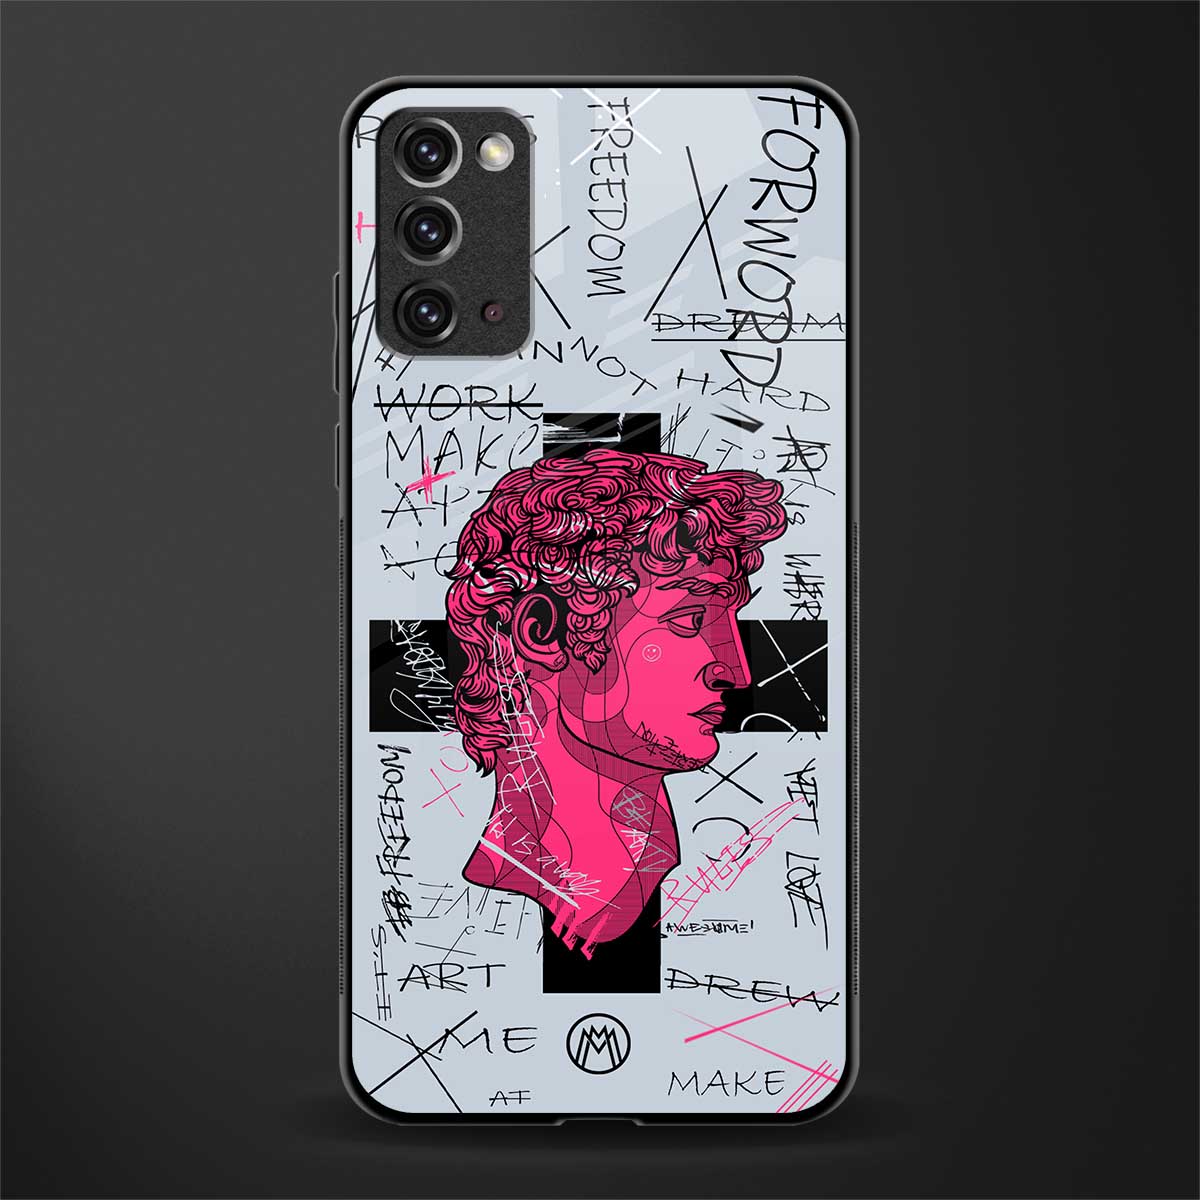 lost in reality david glass case for samsung galaxy note 20 image